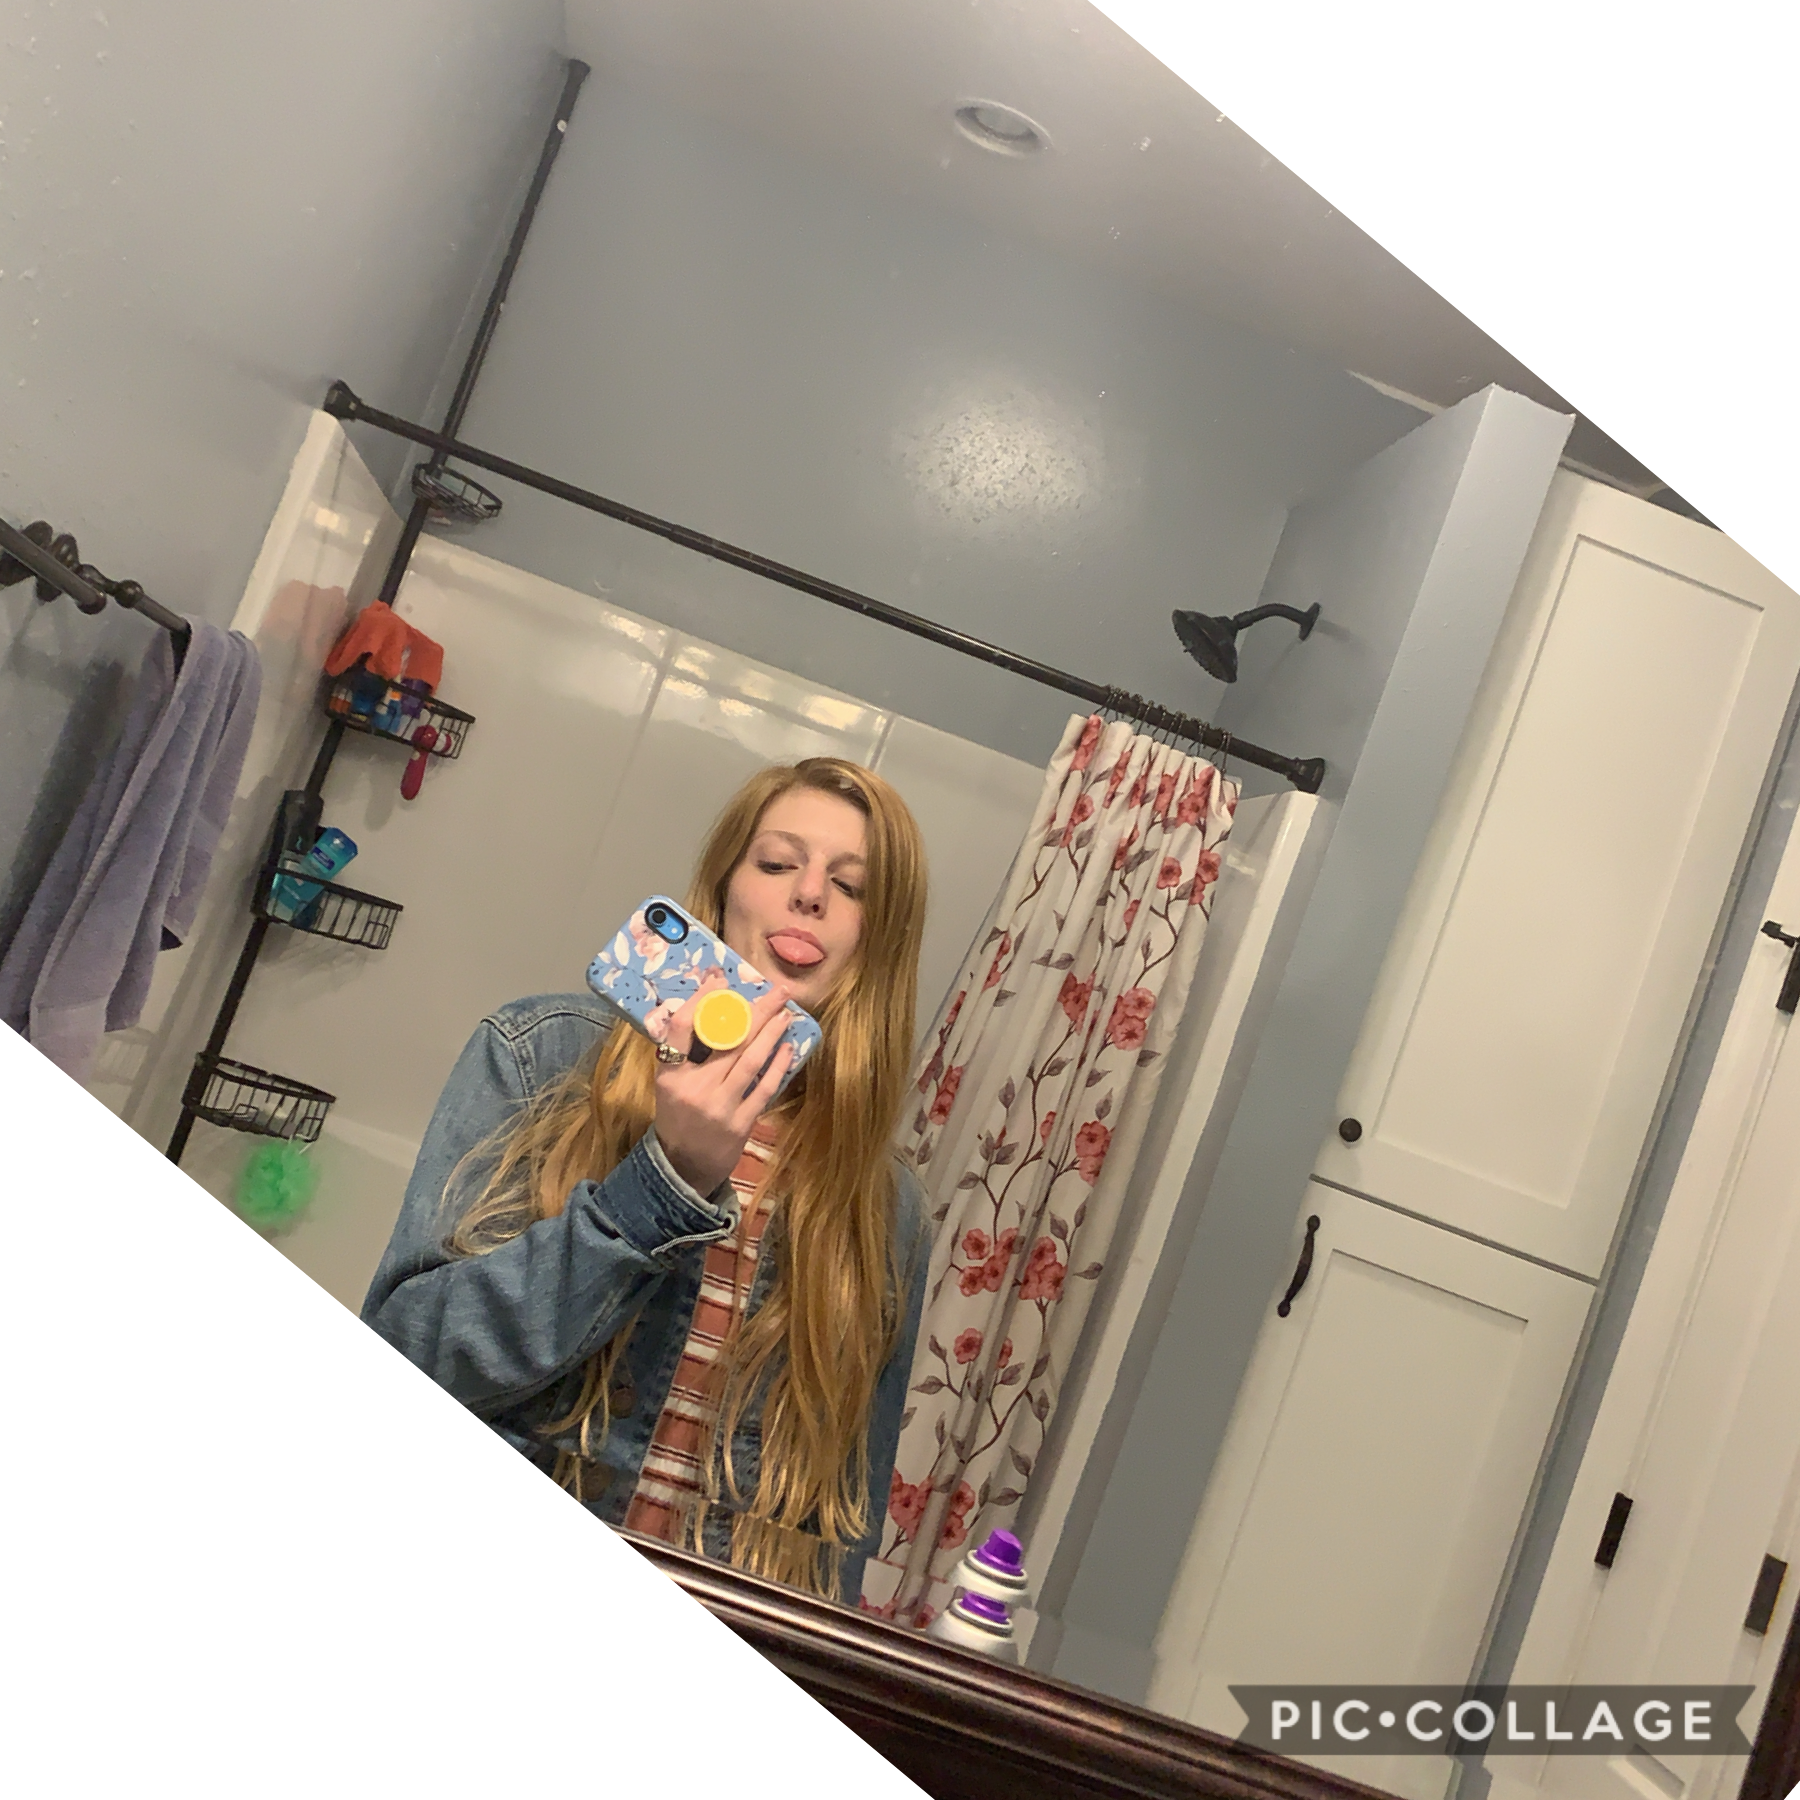 I kinda wanna go to prom? And I kinda don’t? Idk. I don’t wanna go and it suck and I hate it and feel bad but I love dressing up and all that- so conceited I know- but ? Yeah? I’m stuck:/ thoughts? 